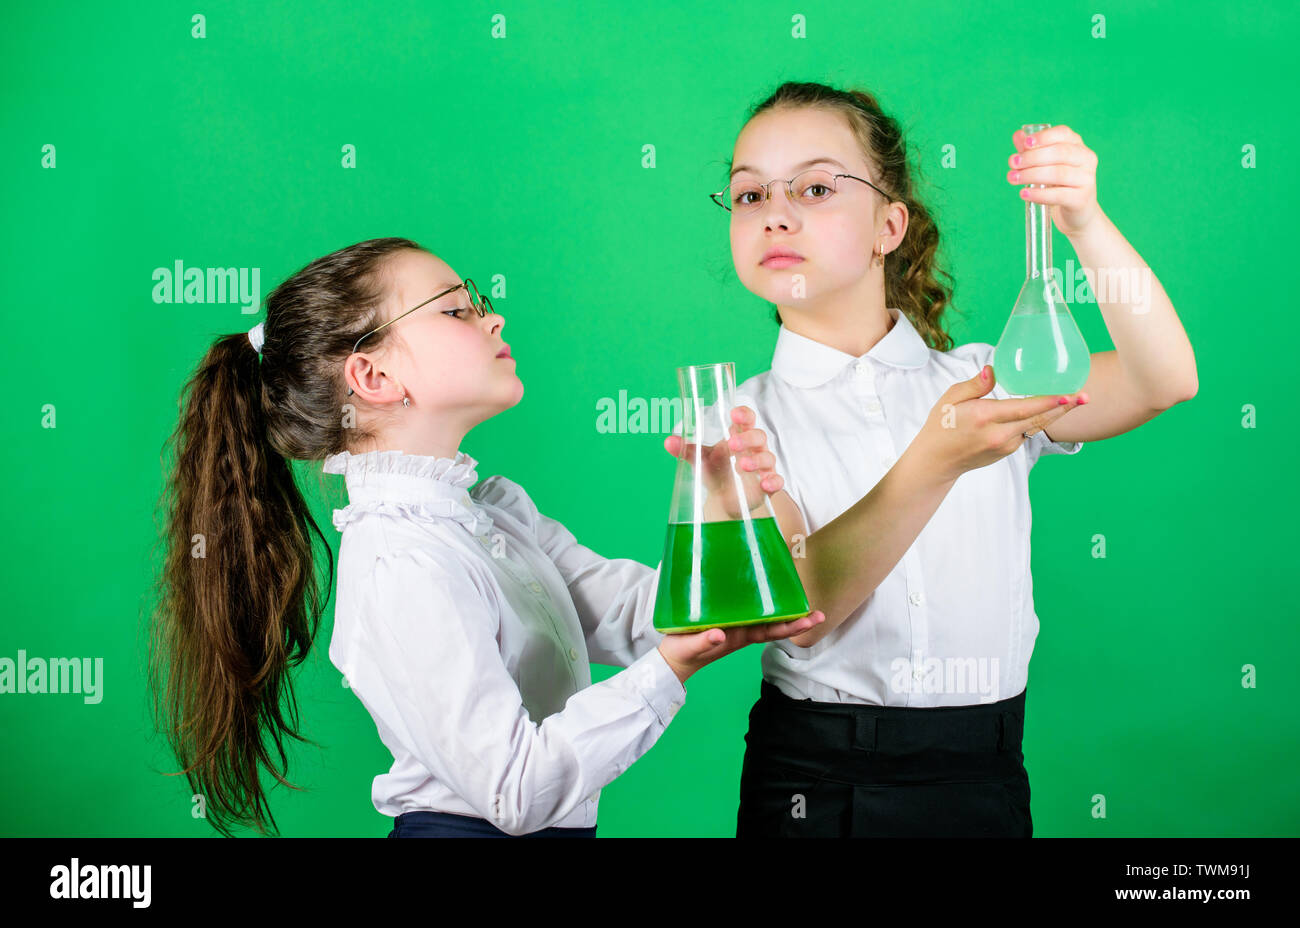 children study chemistry lab. back to school. biology education. little smart girls with testing flask. school kid scientist studying science. Bright minds at work. laboratory work. school work place. Stock Photo